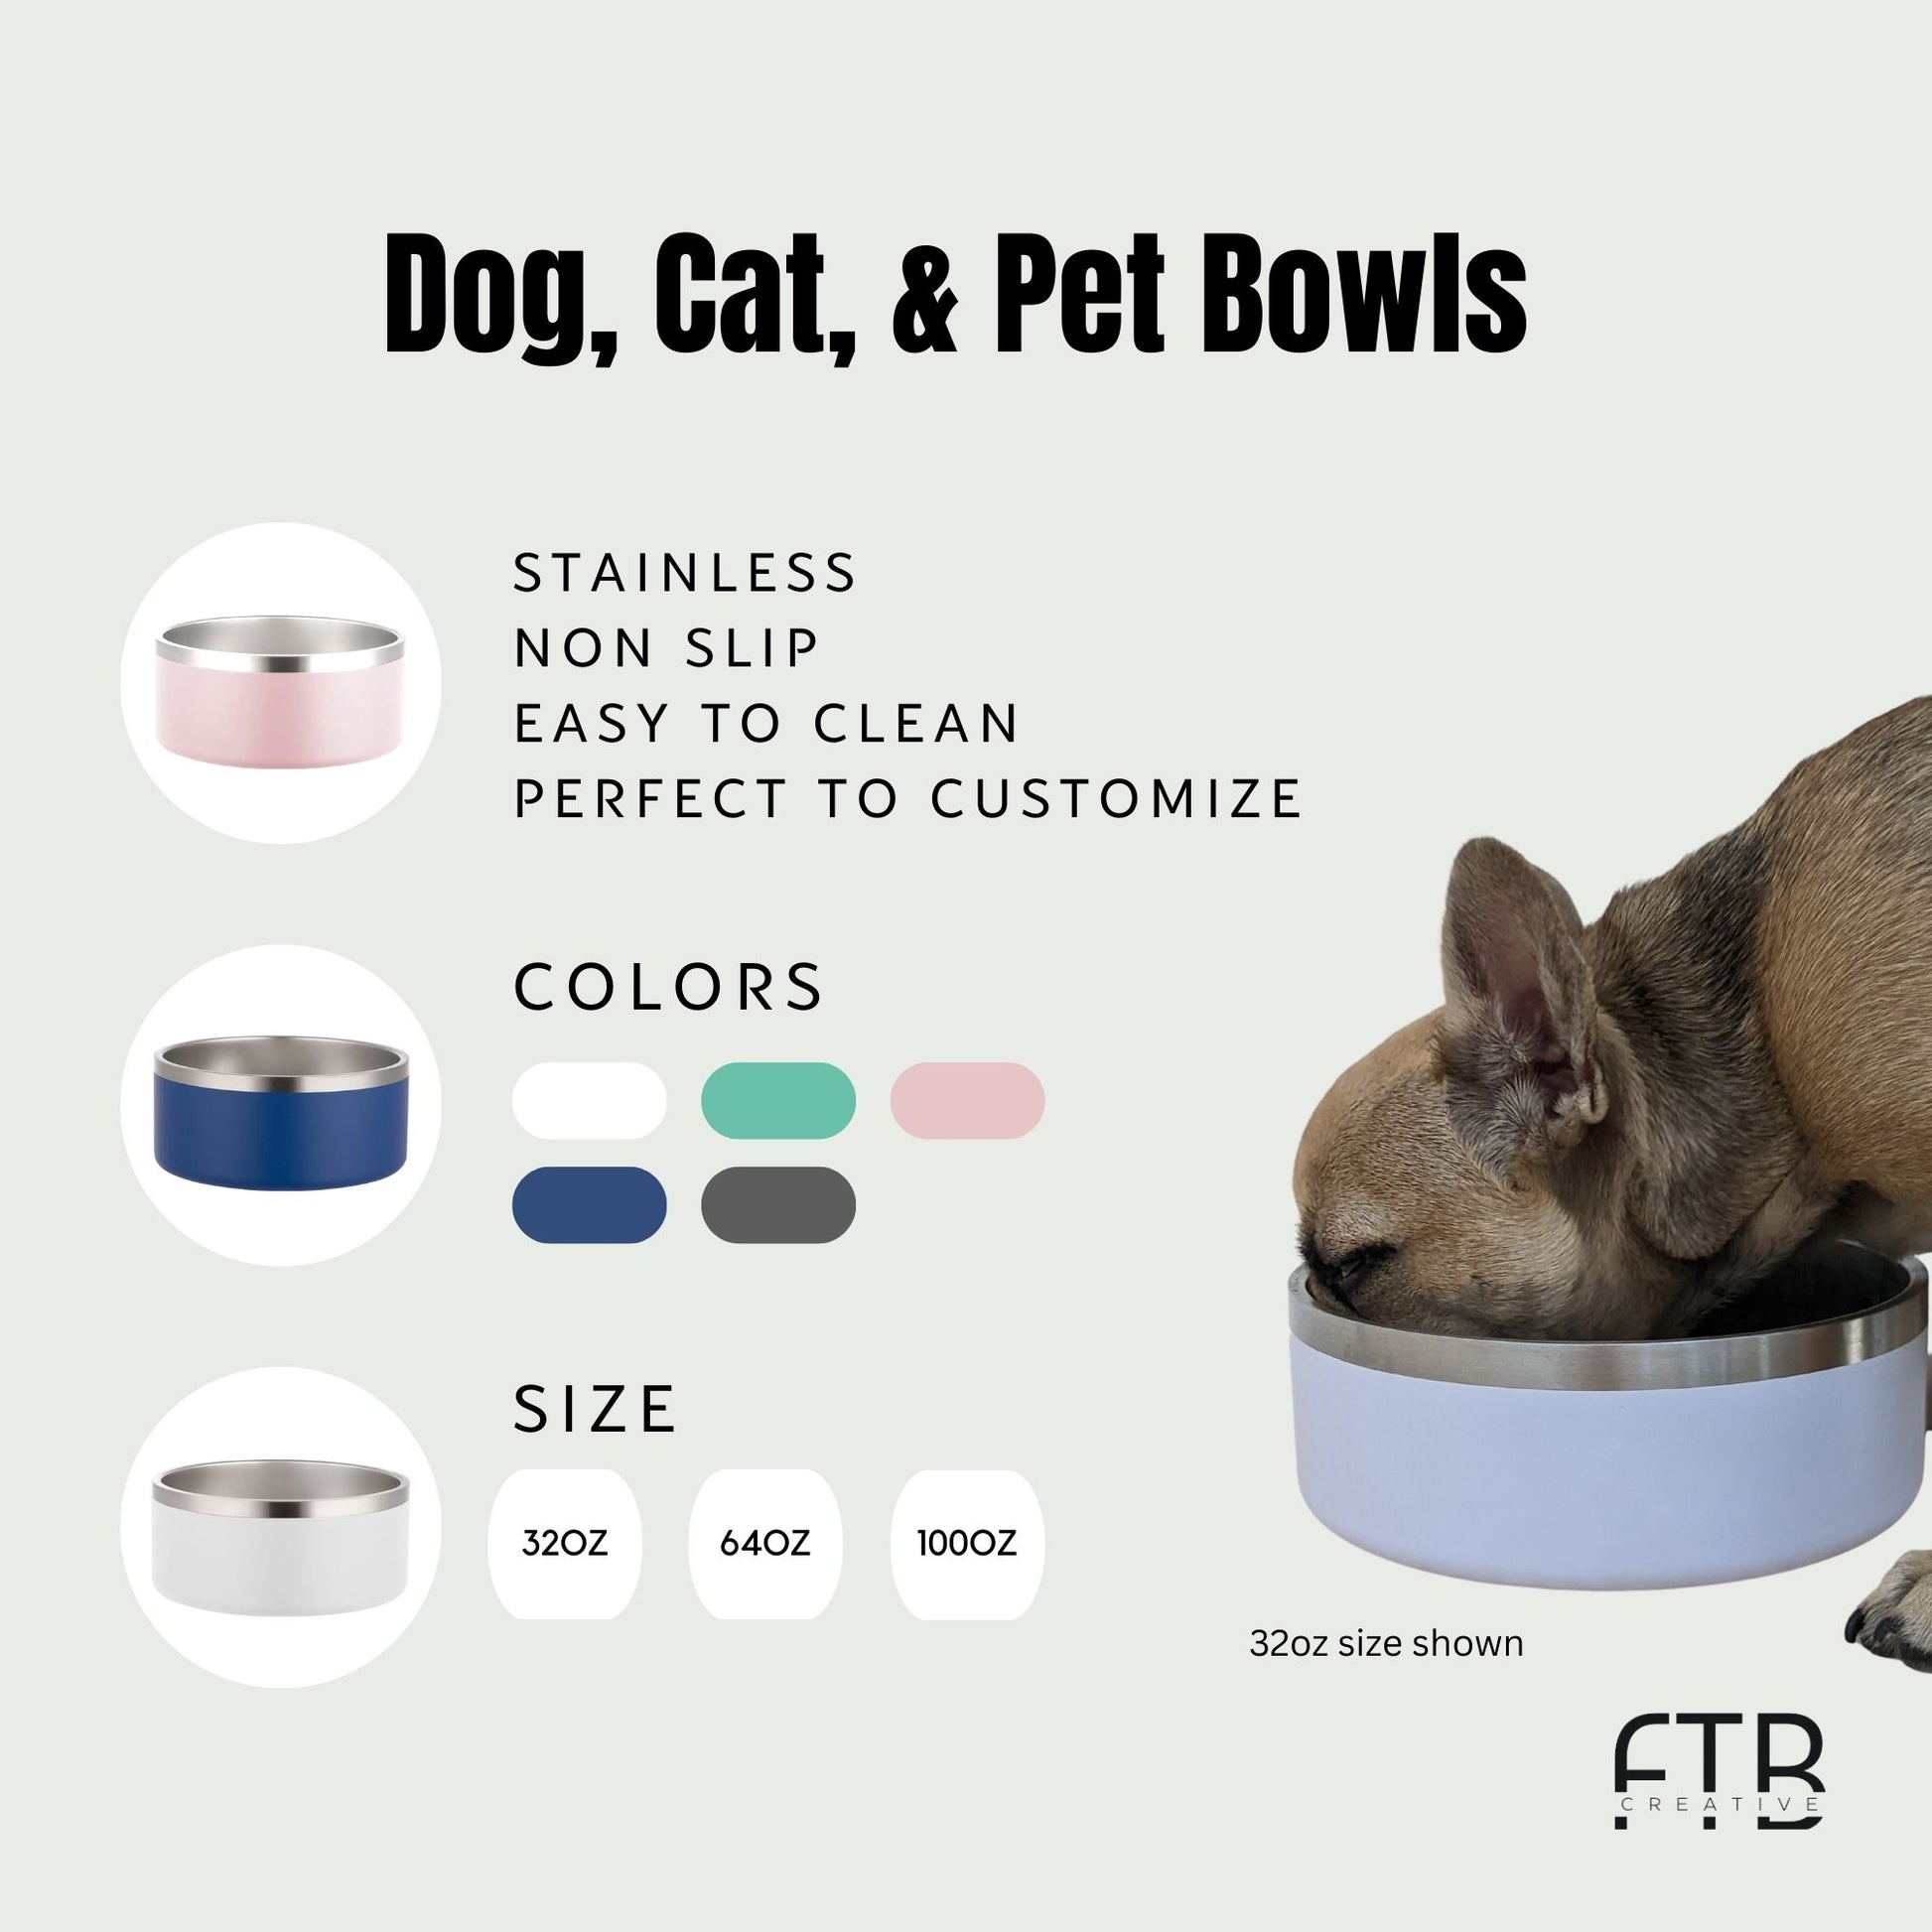 Large Personalized Dog Bowl - 64 oz Pet Bowl in 6 Colors